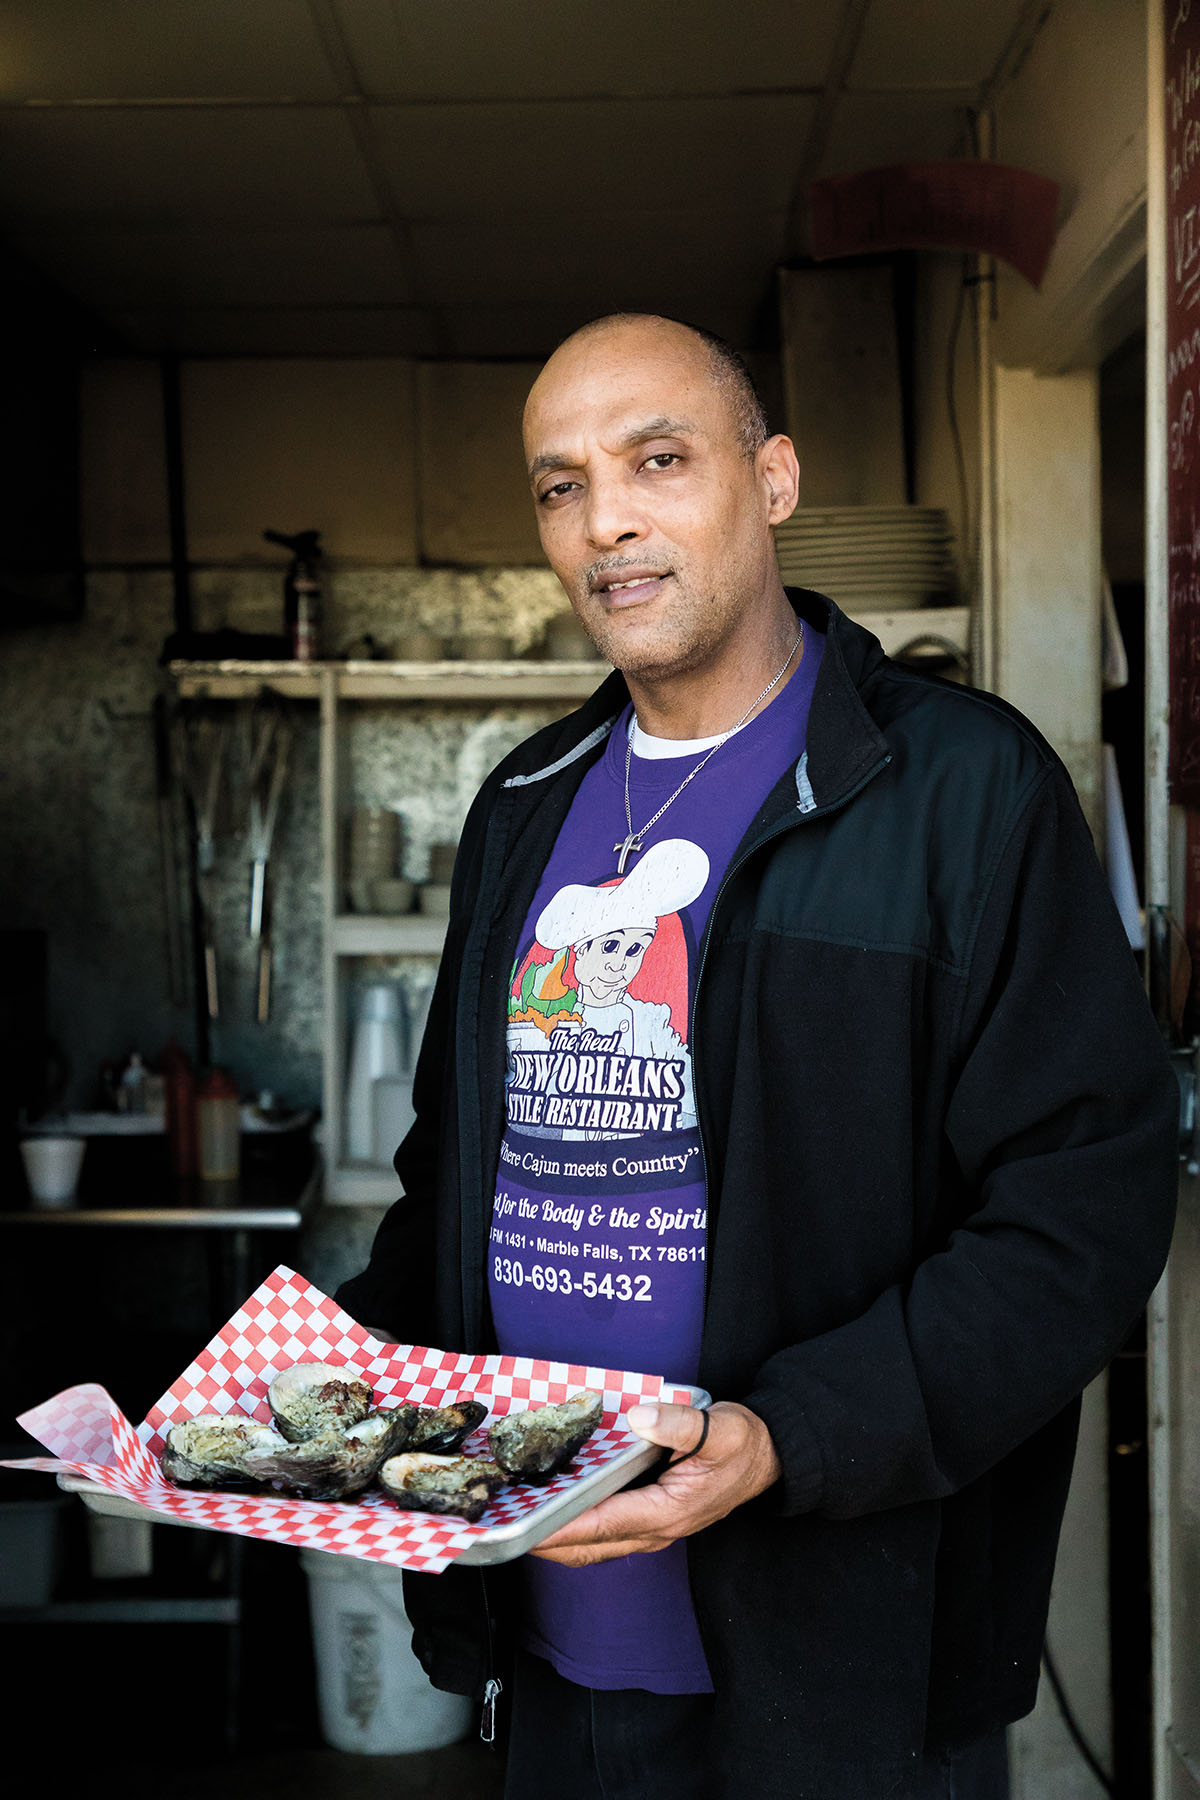 A man in a purple shirt and black jacket holds a platter of oysters